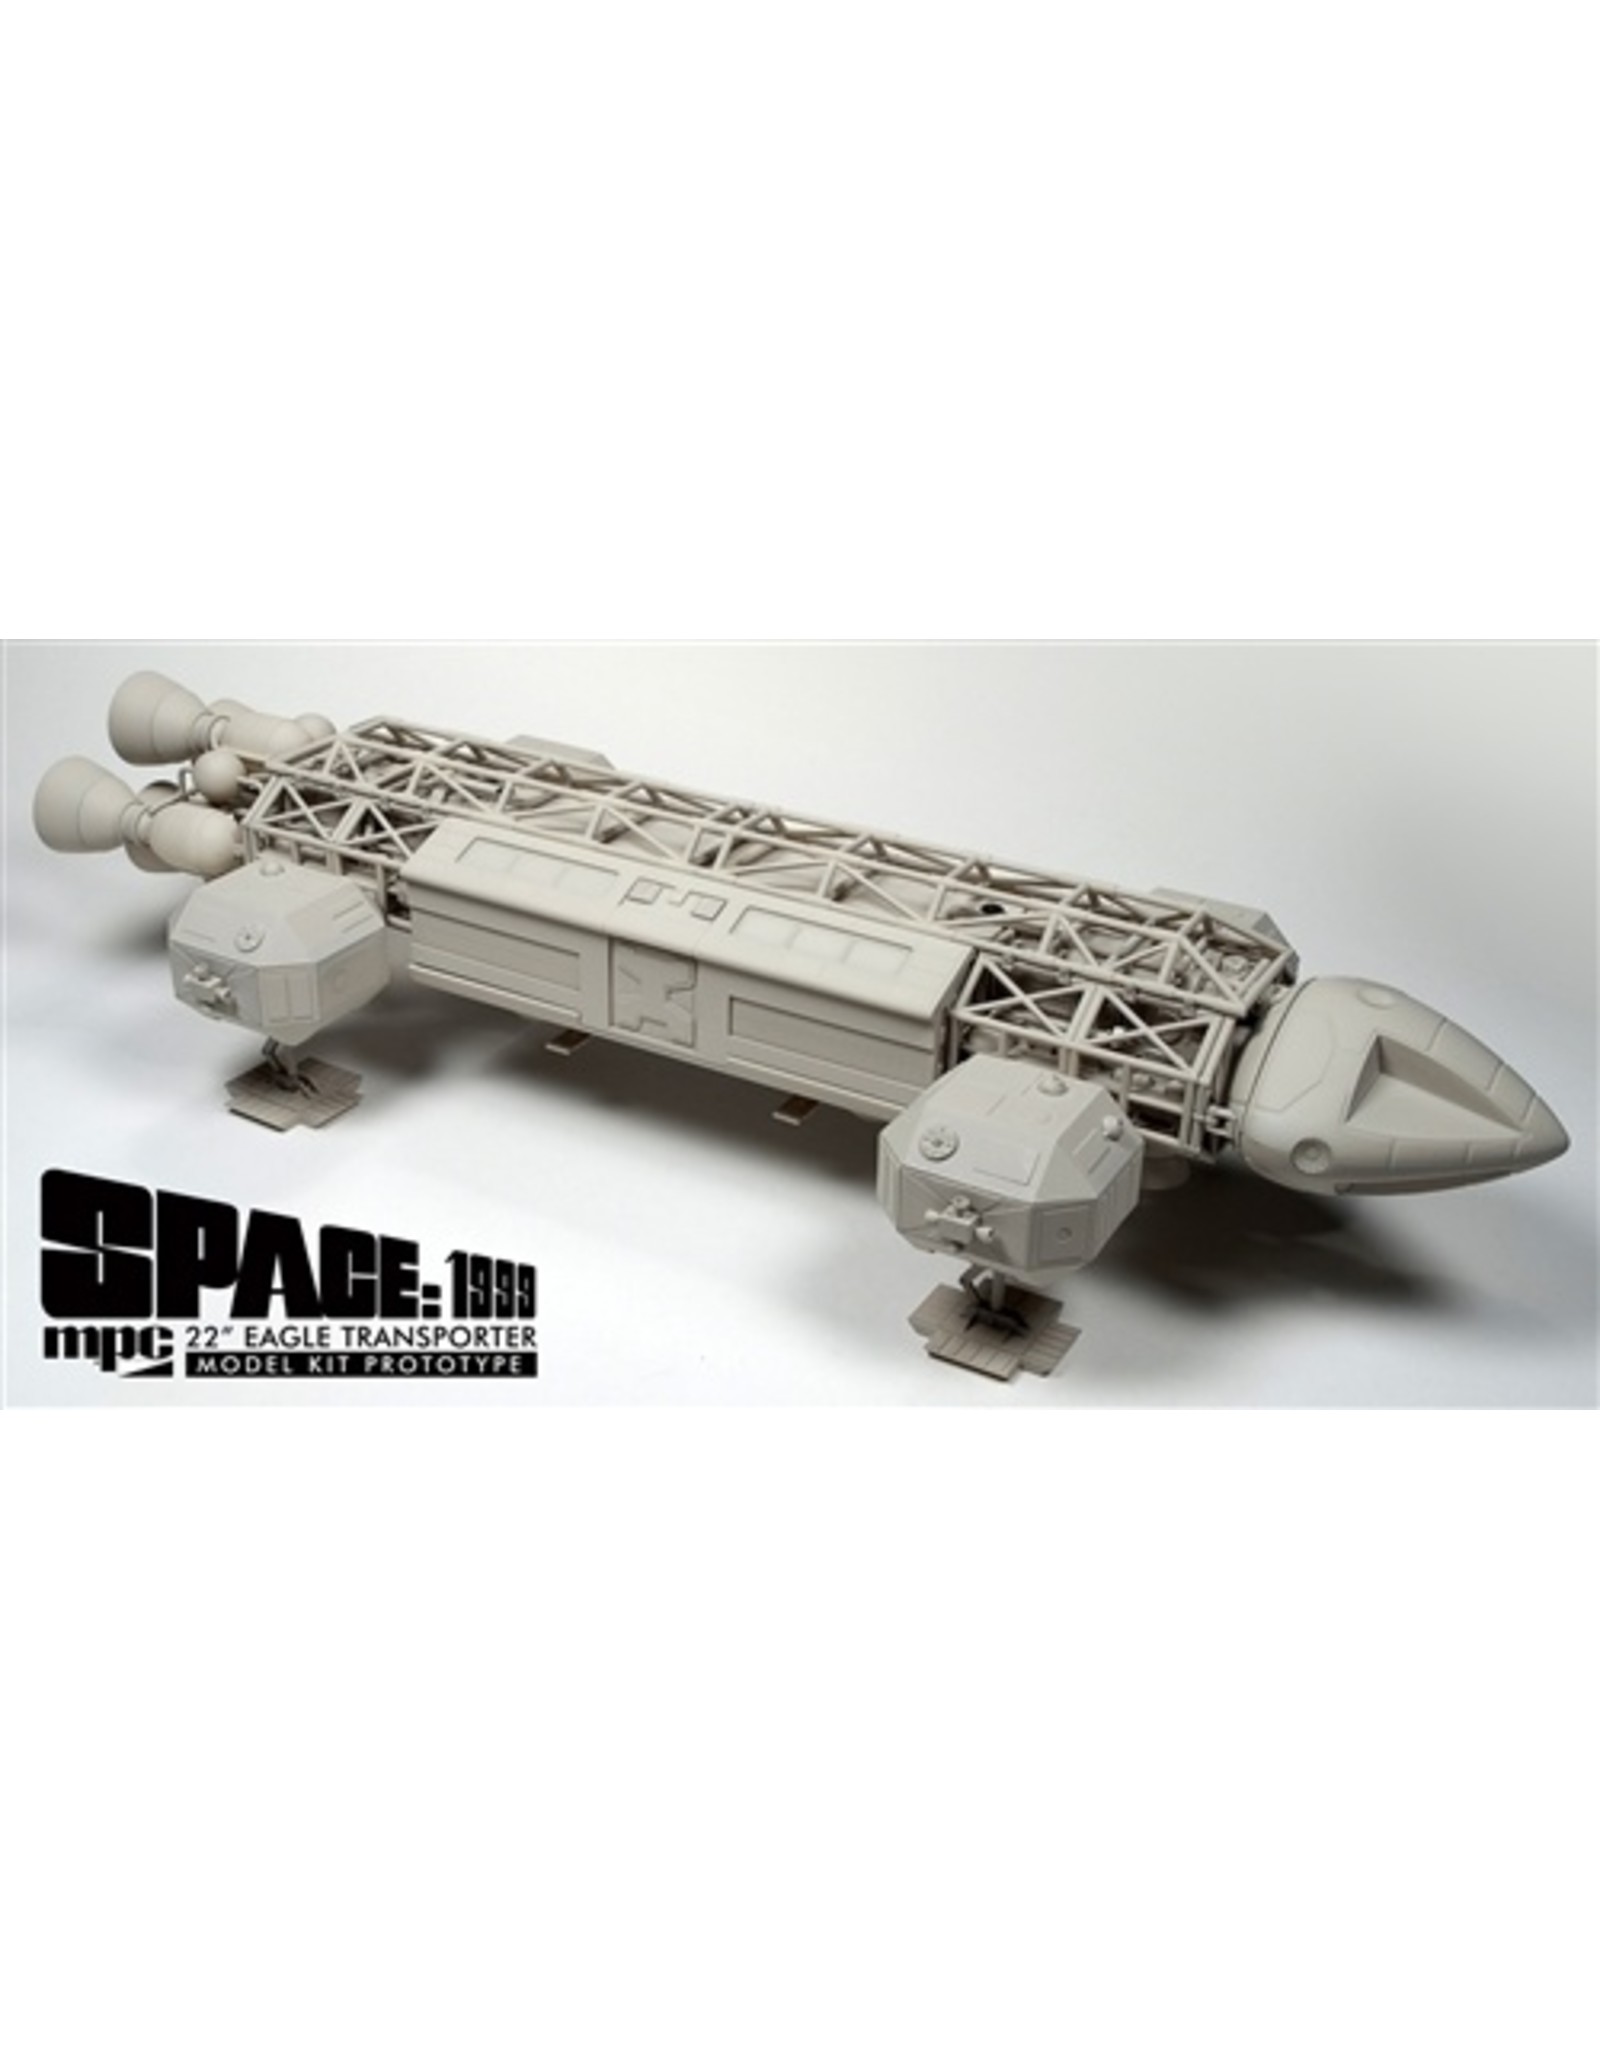 MPC 825 Space:1999 Eagle 1/48 Model Kit for sale online